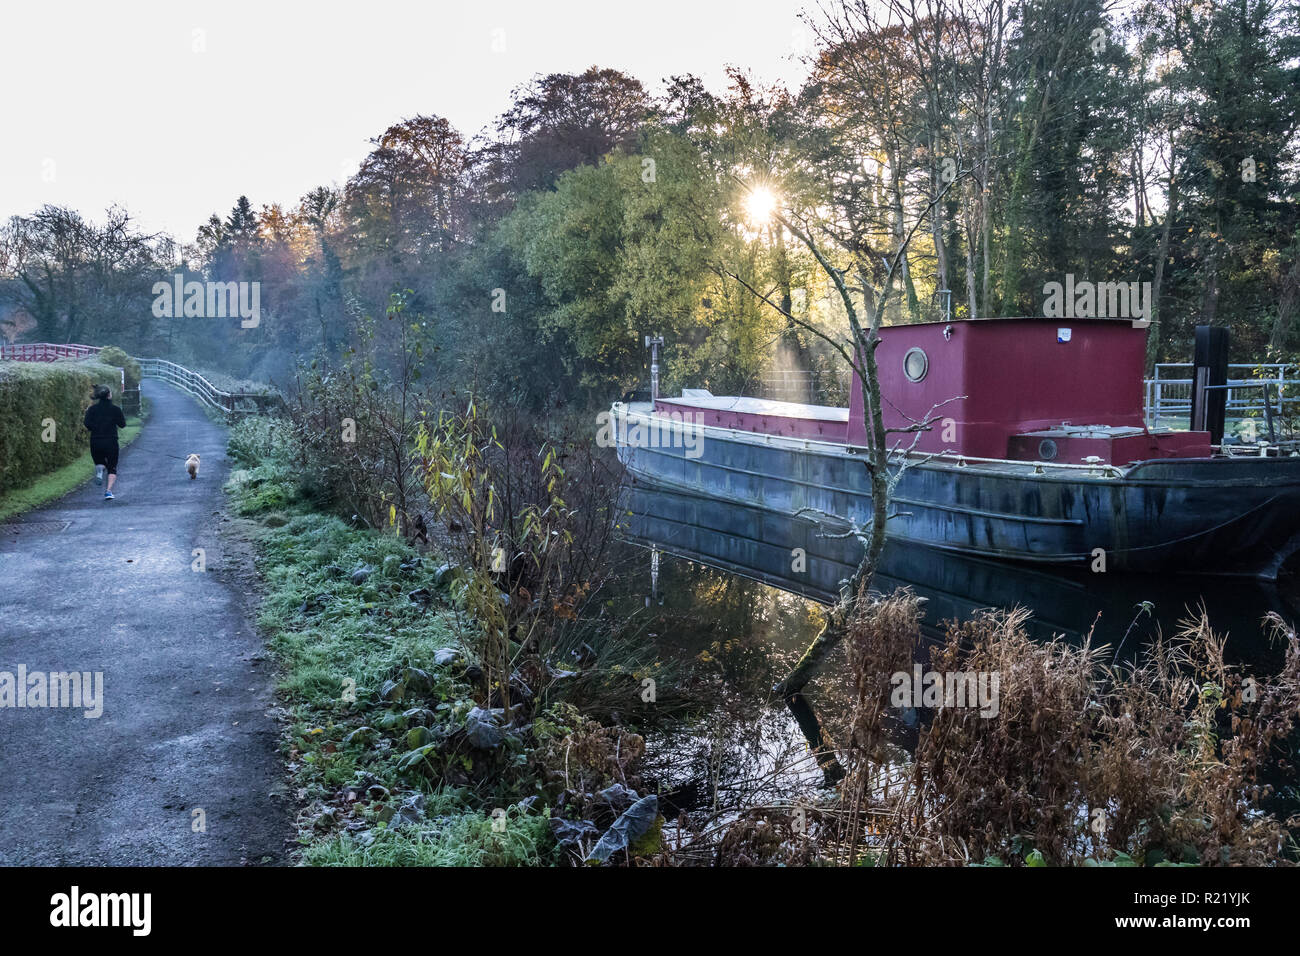 Sunlight bursts through the trees and mist on a cold frosty morning behind a canal barge with path alongside with girl joggin with dog. Lagan Towpath, Stock Photo